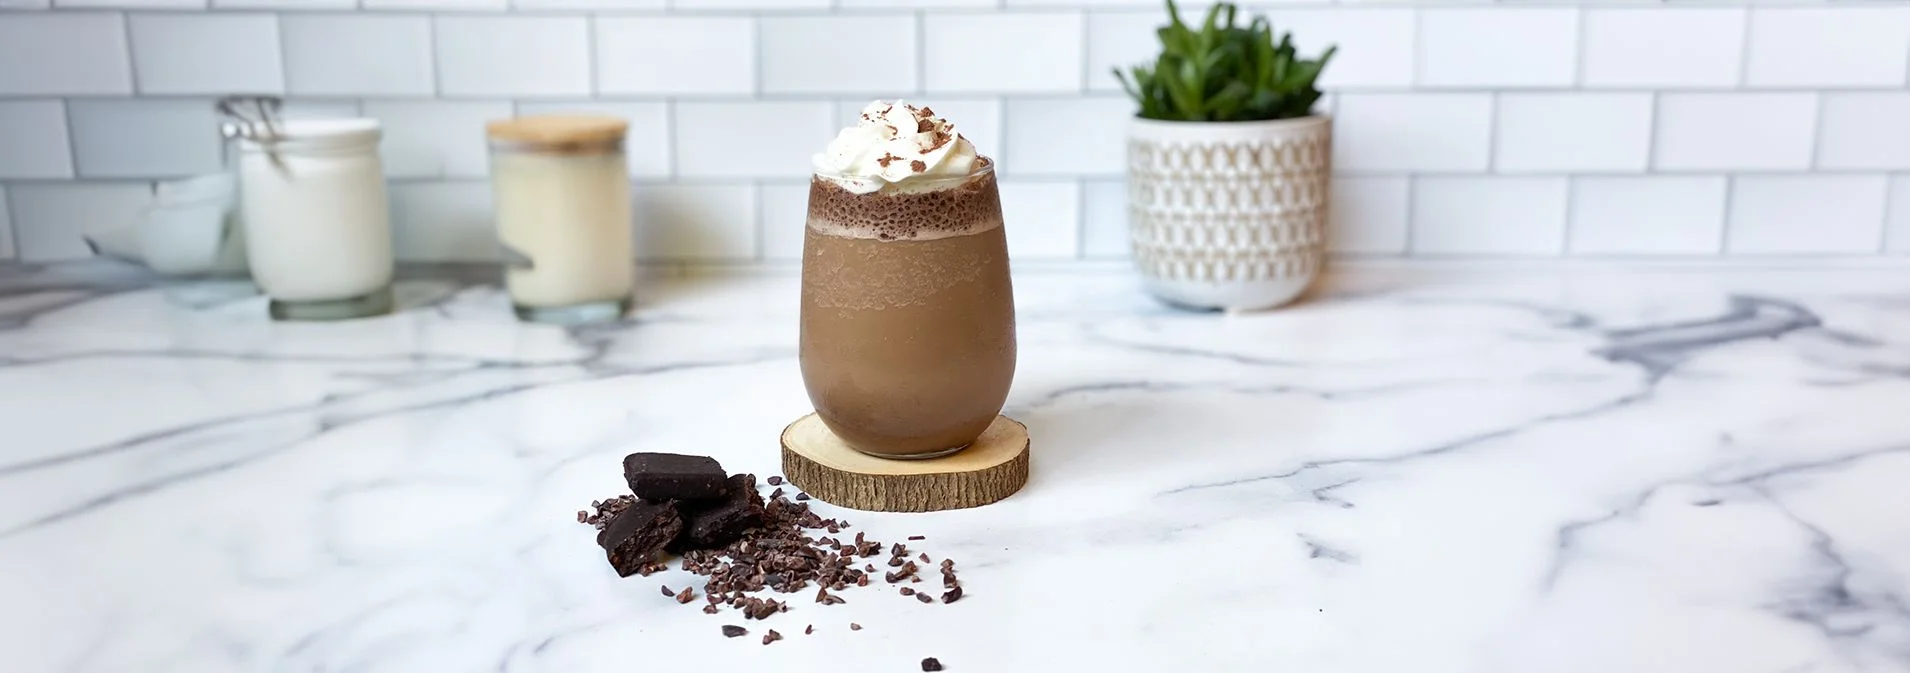 Front view of the Mocha Frappuccino in a glass cup on a wooden coaster with chocolate and cocoa nibs next to it and a plant in the background